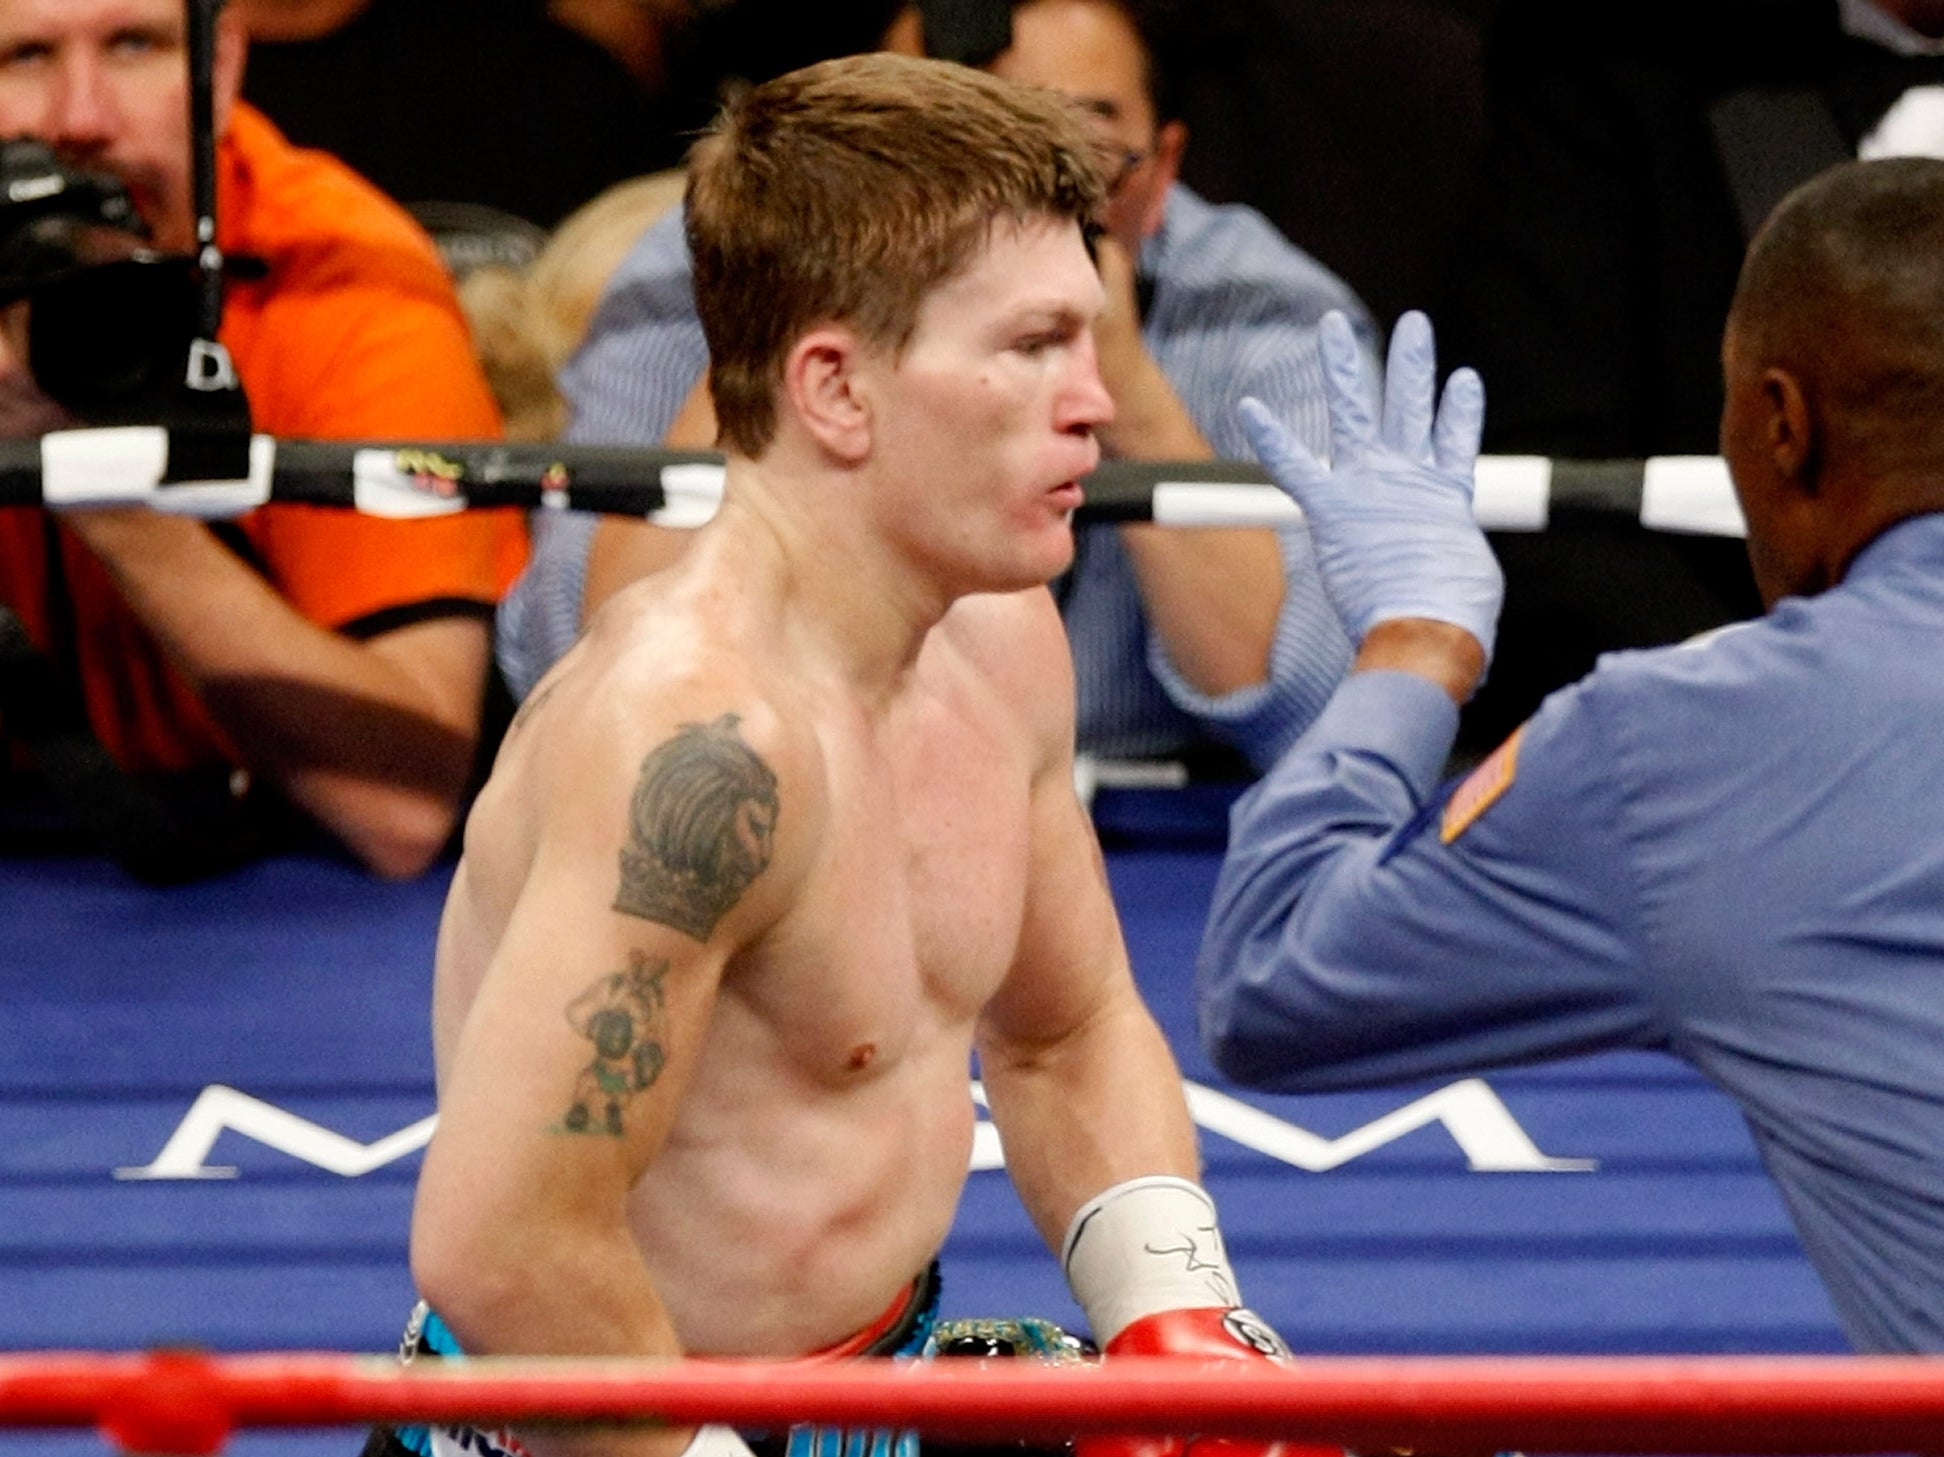 Ricky Hatton details mental-health struggles after Floyd Mayweather and Manny Pacquiao defeats The Independent